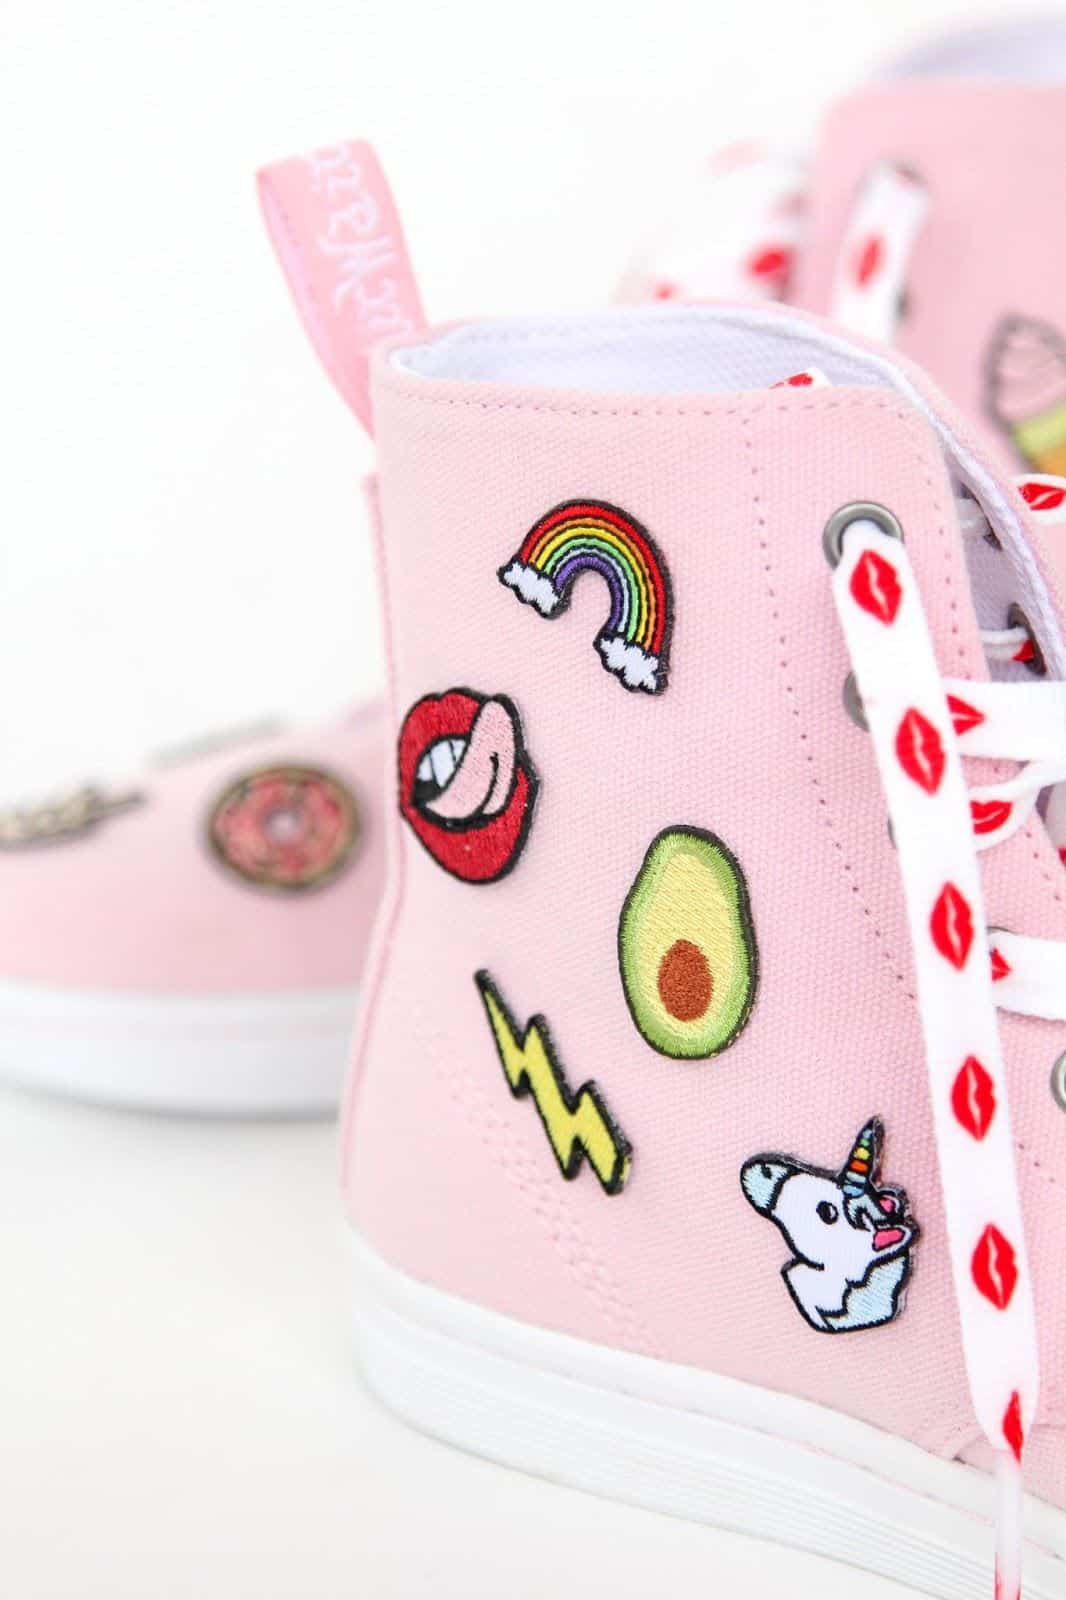 DIY Patch Patterned Sneakers